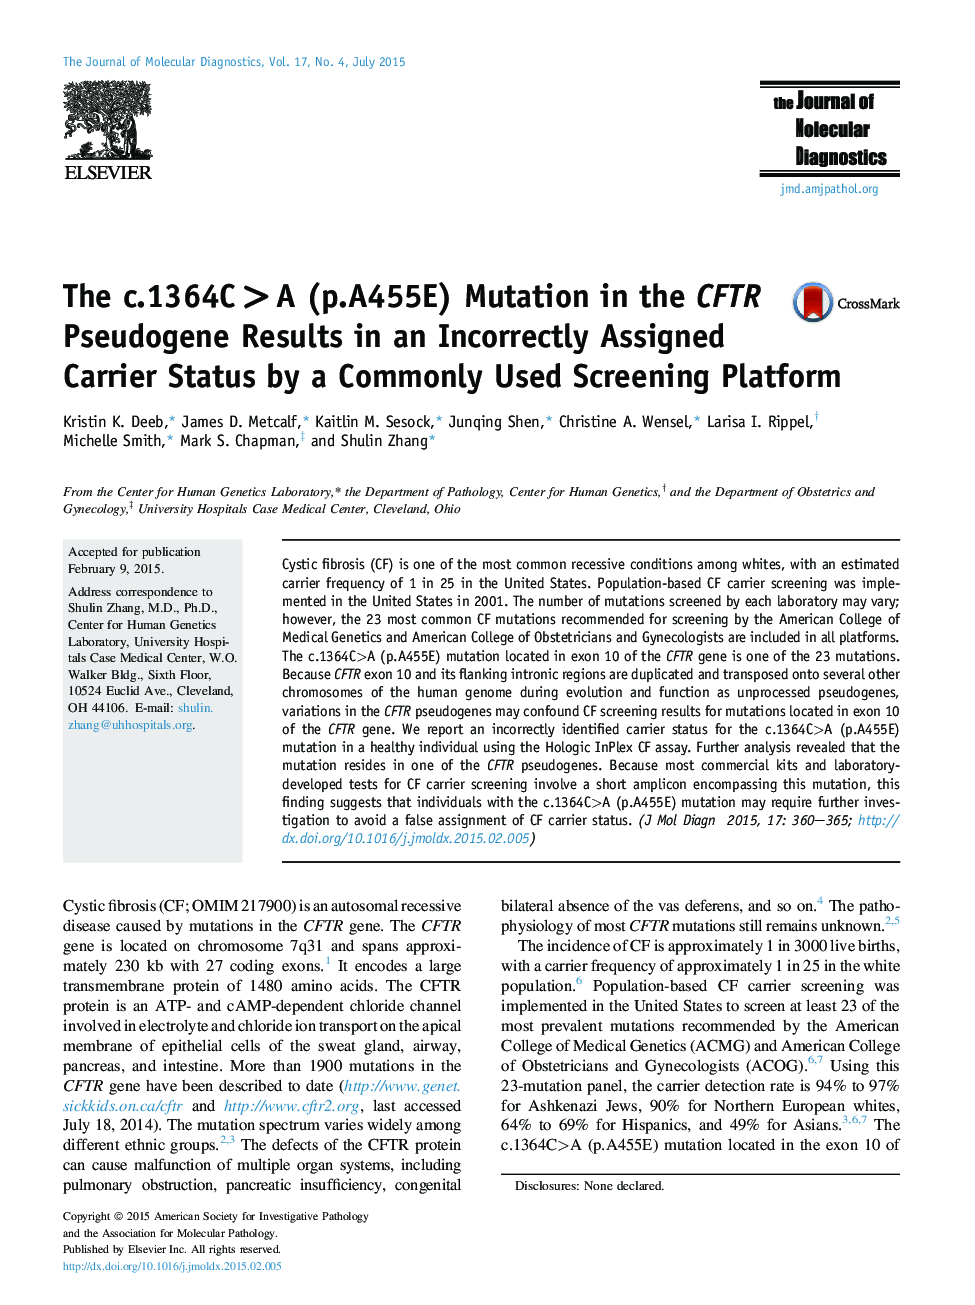 The c.1364C>A (p.A455E) Mutation in the CFTR Pseudogene Results in an Incorrectly Assigned Carrier Status by a Commonly Used Screening Platform 